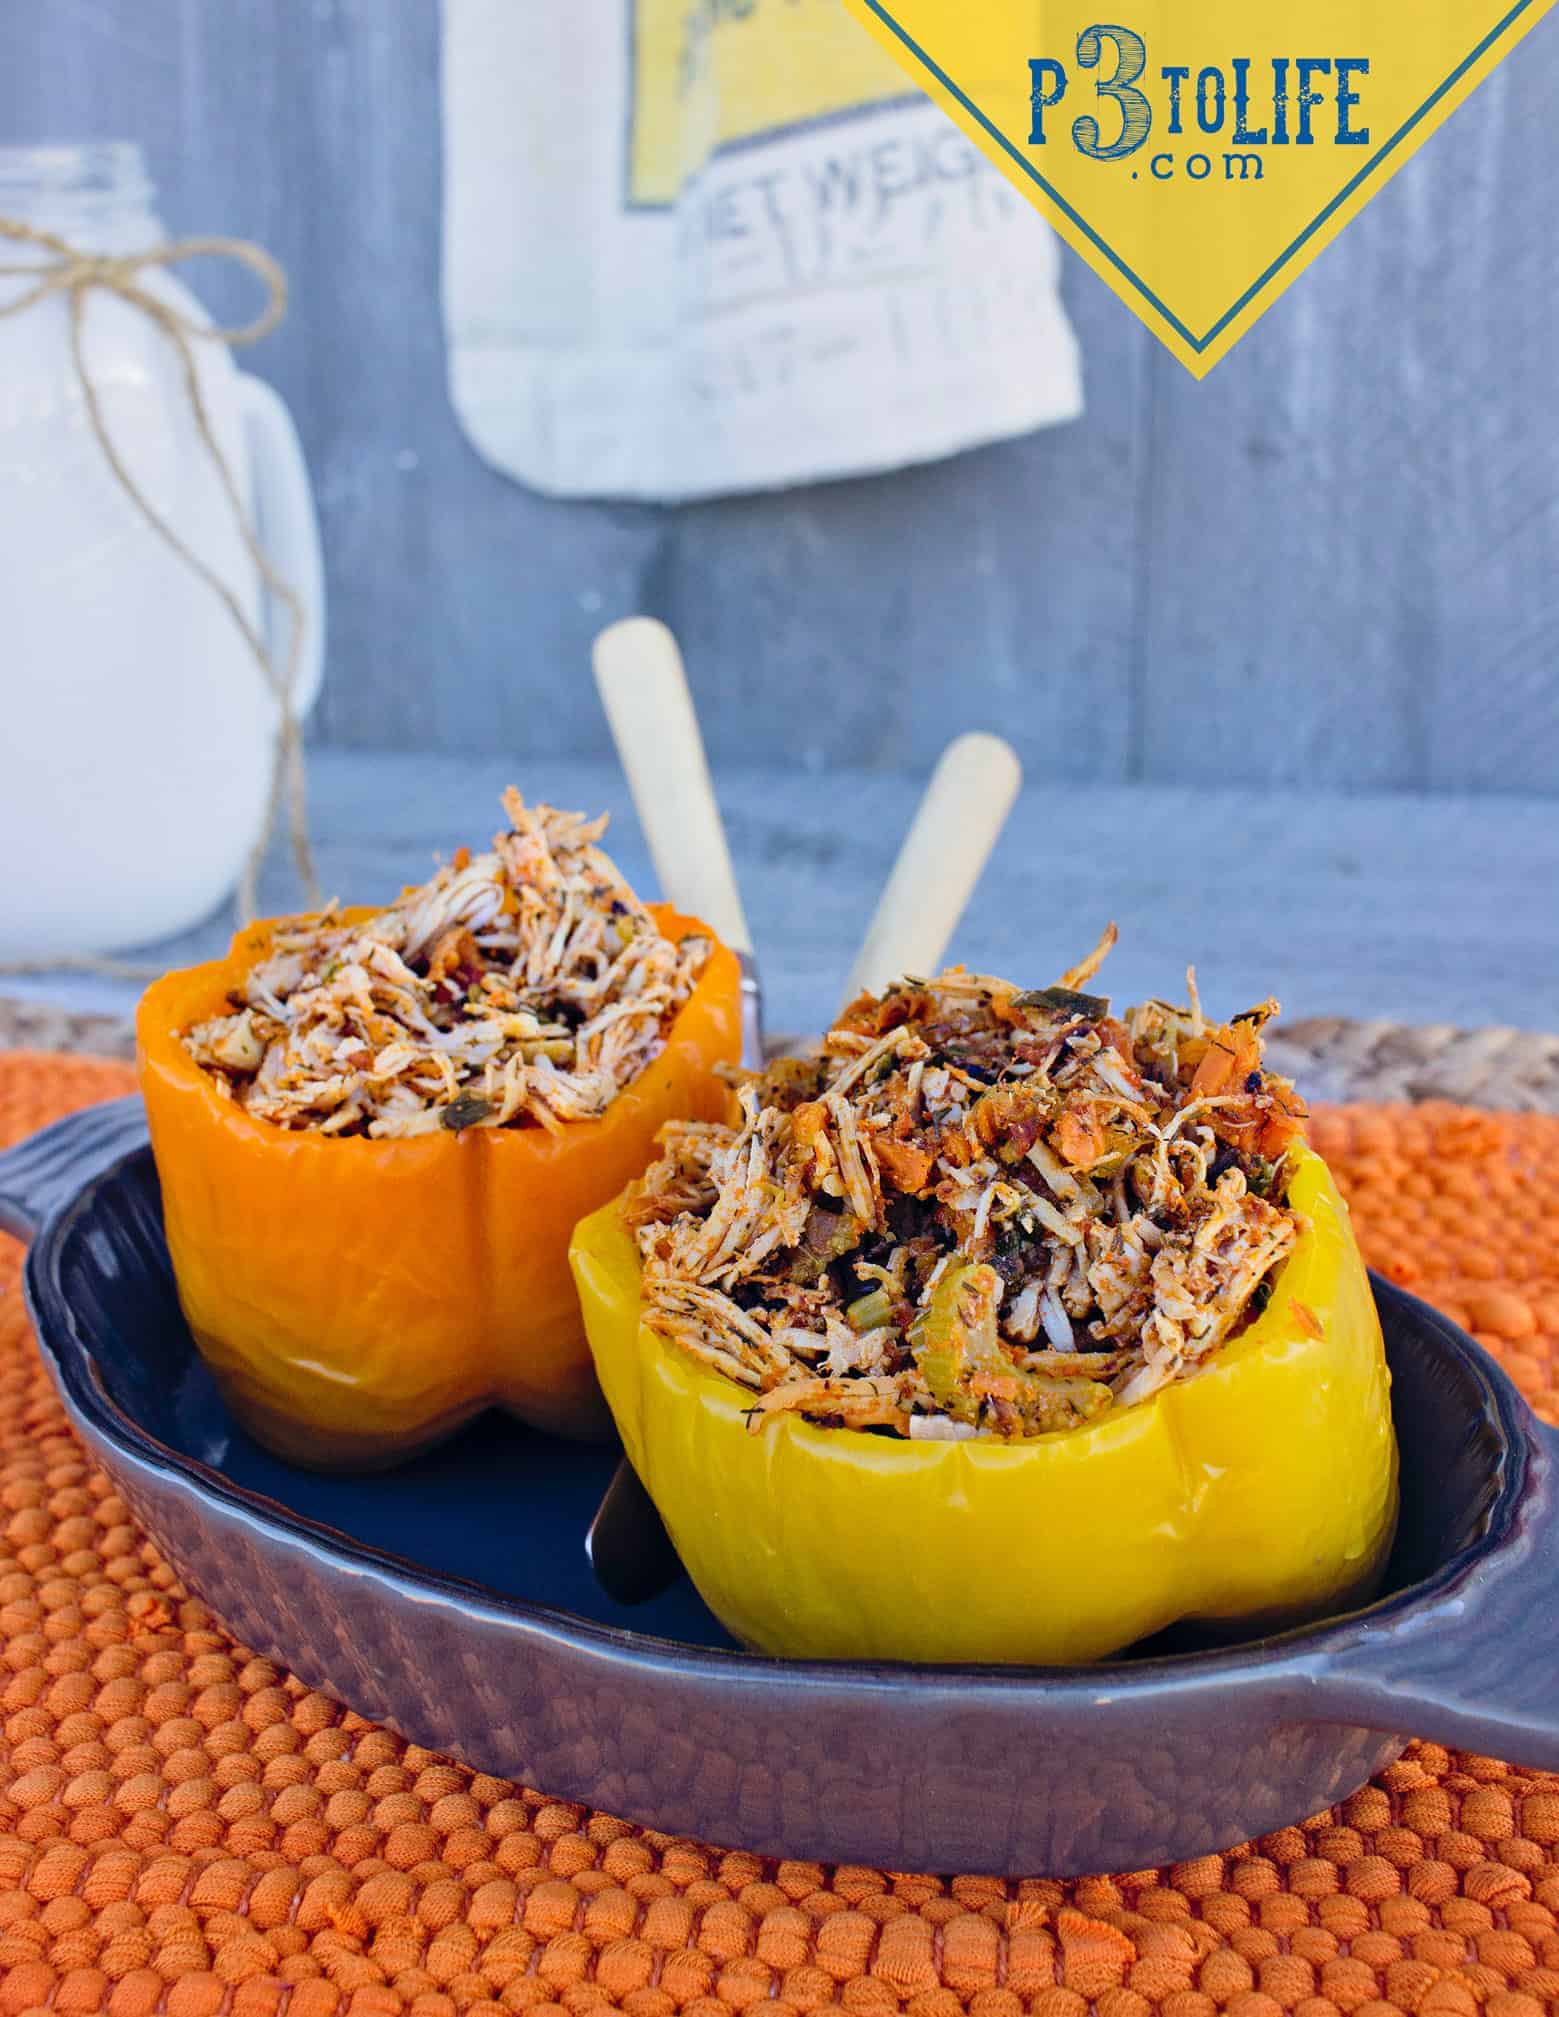 Phase 3 hCG Diet Main Meals: Buffalo Style Stuffed Peppers - 6 P3tolife | 393 cal | 42g protein | 13g fat | net - Phase 3 to hCG Maintenance Program